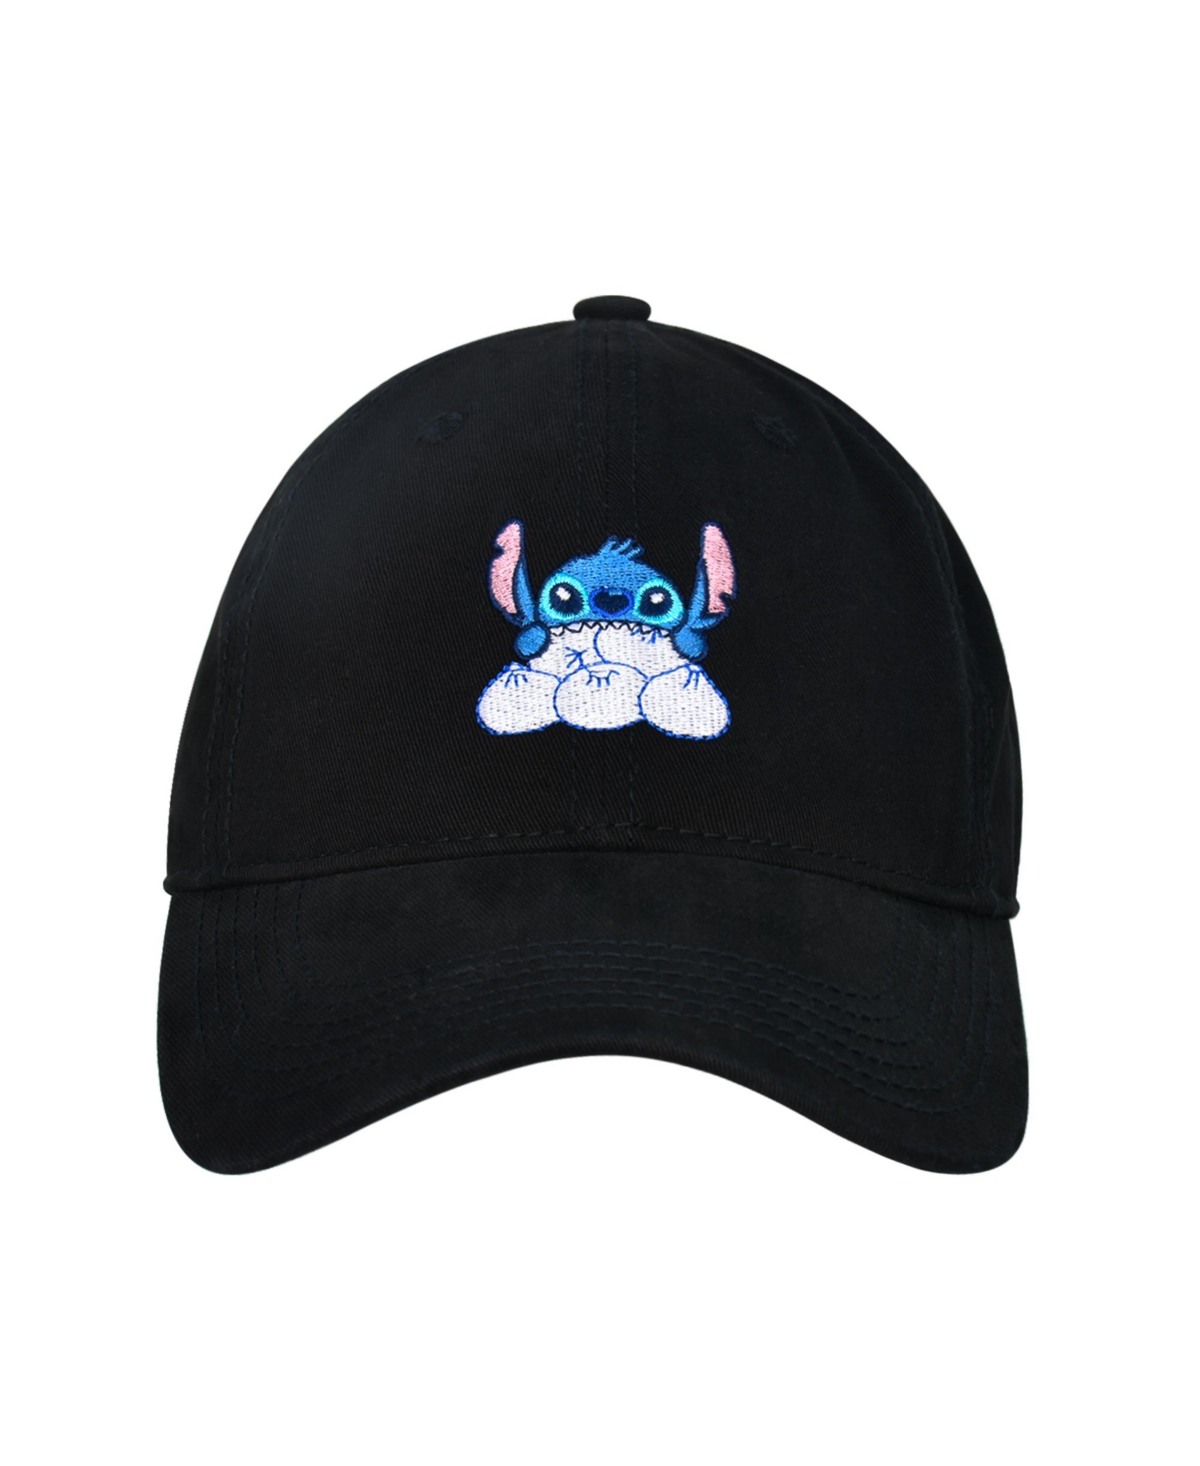 Disney's Lilo and Stitch Adjustable Baseball Hat with Curved Brim - Black